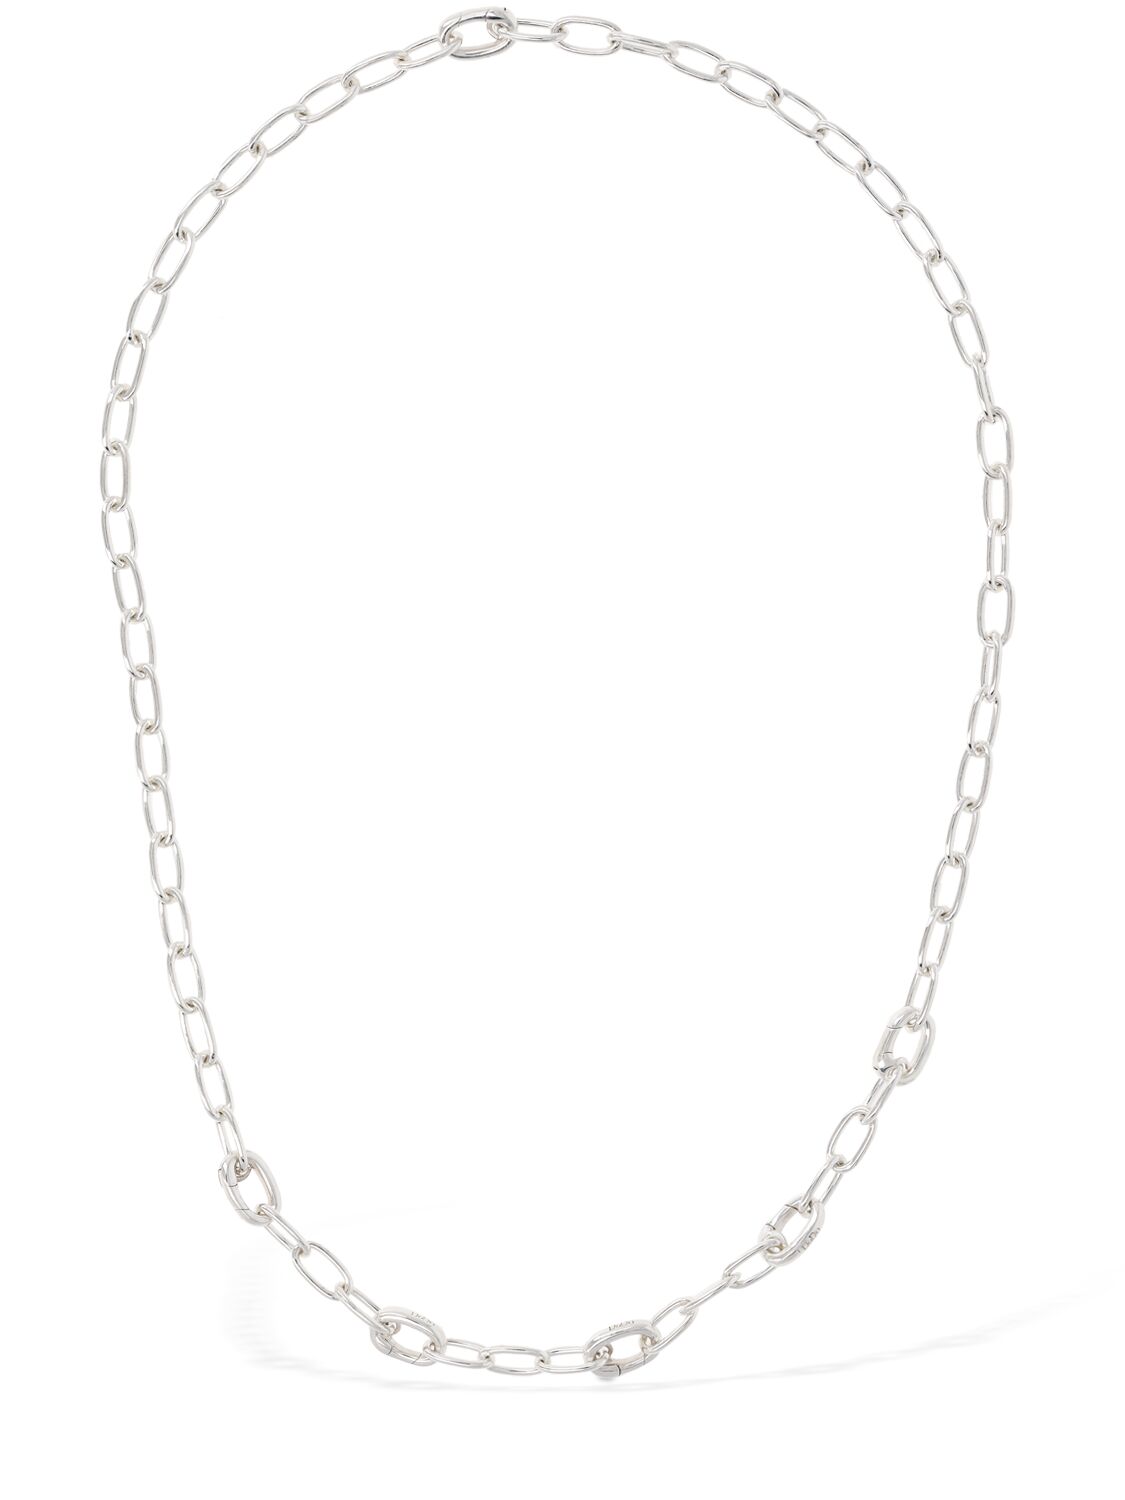 Apribli Essentials Necklace – WOMEN > JEWELRY & WATCHES > NECKLACES